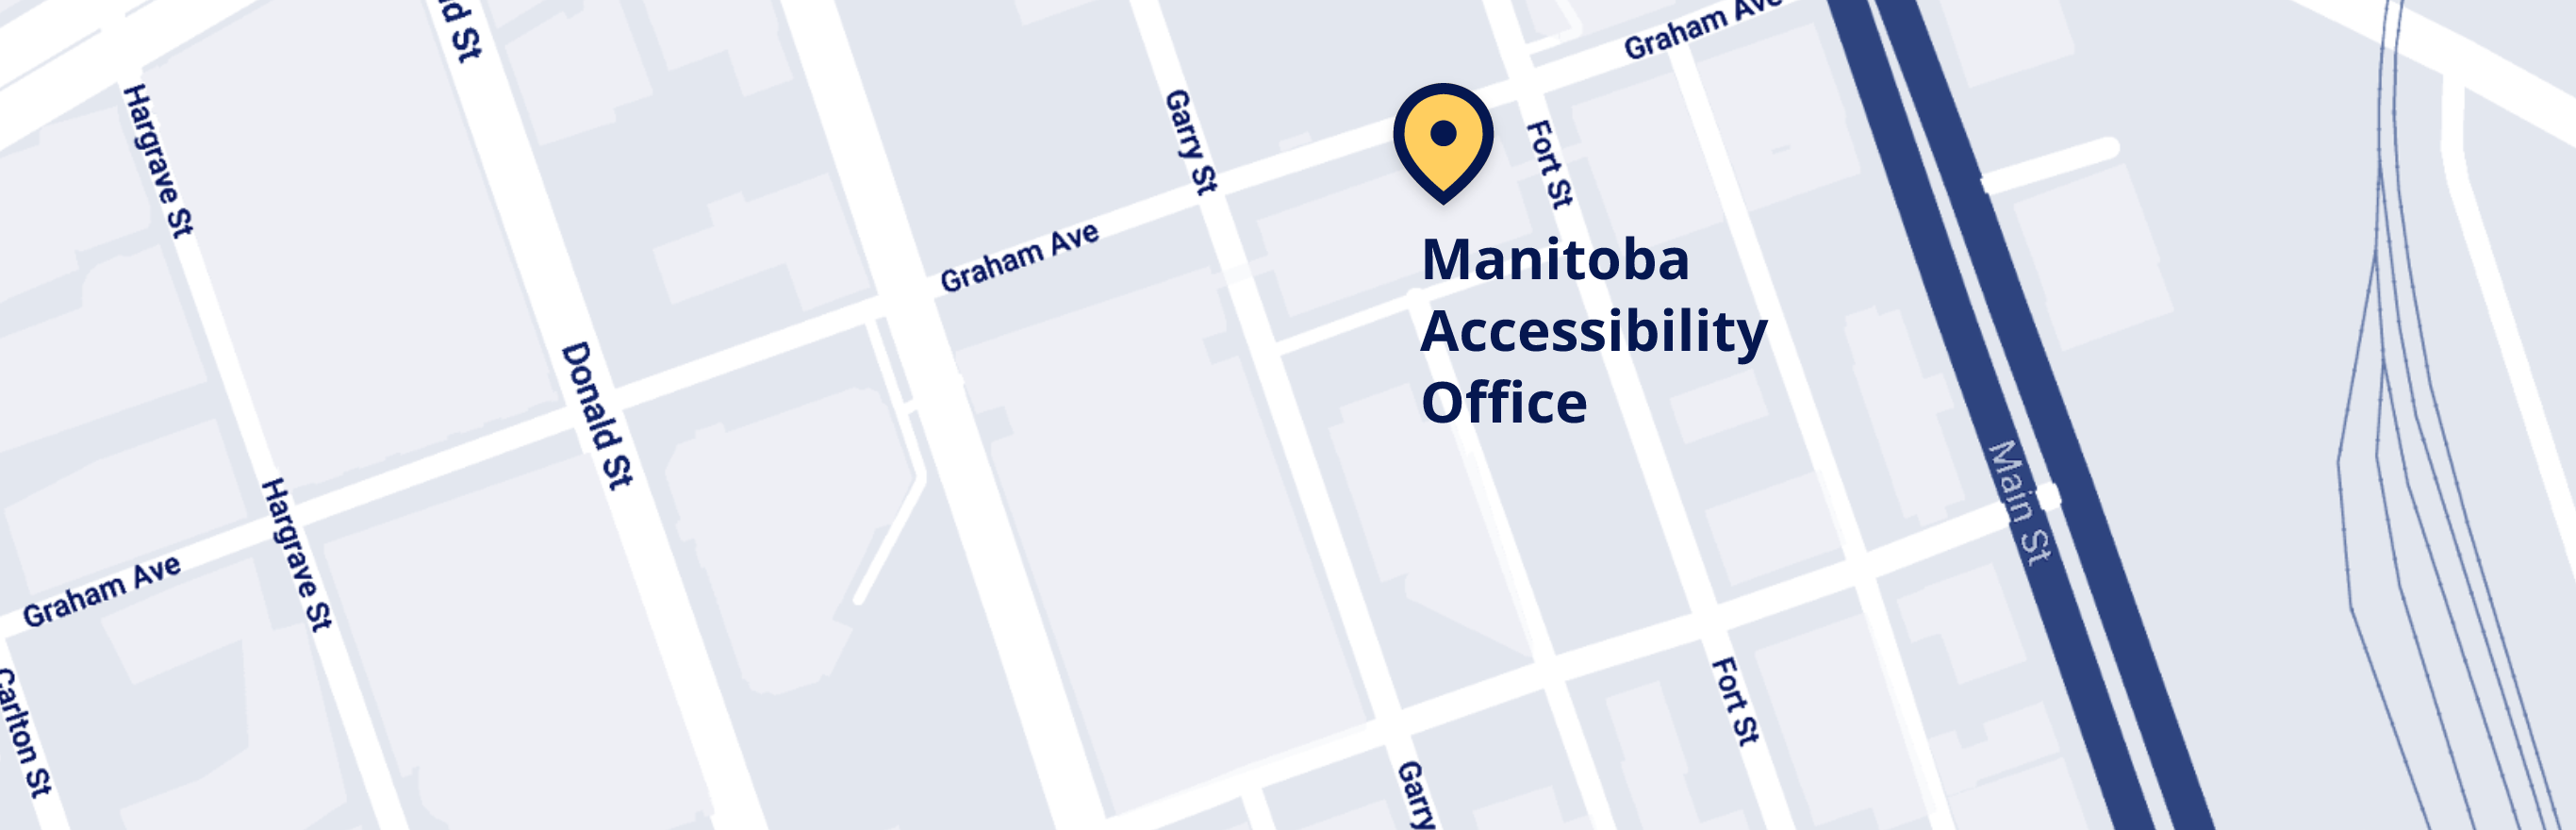 Feature Map of Manitoba Accessibility Office’s Location